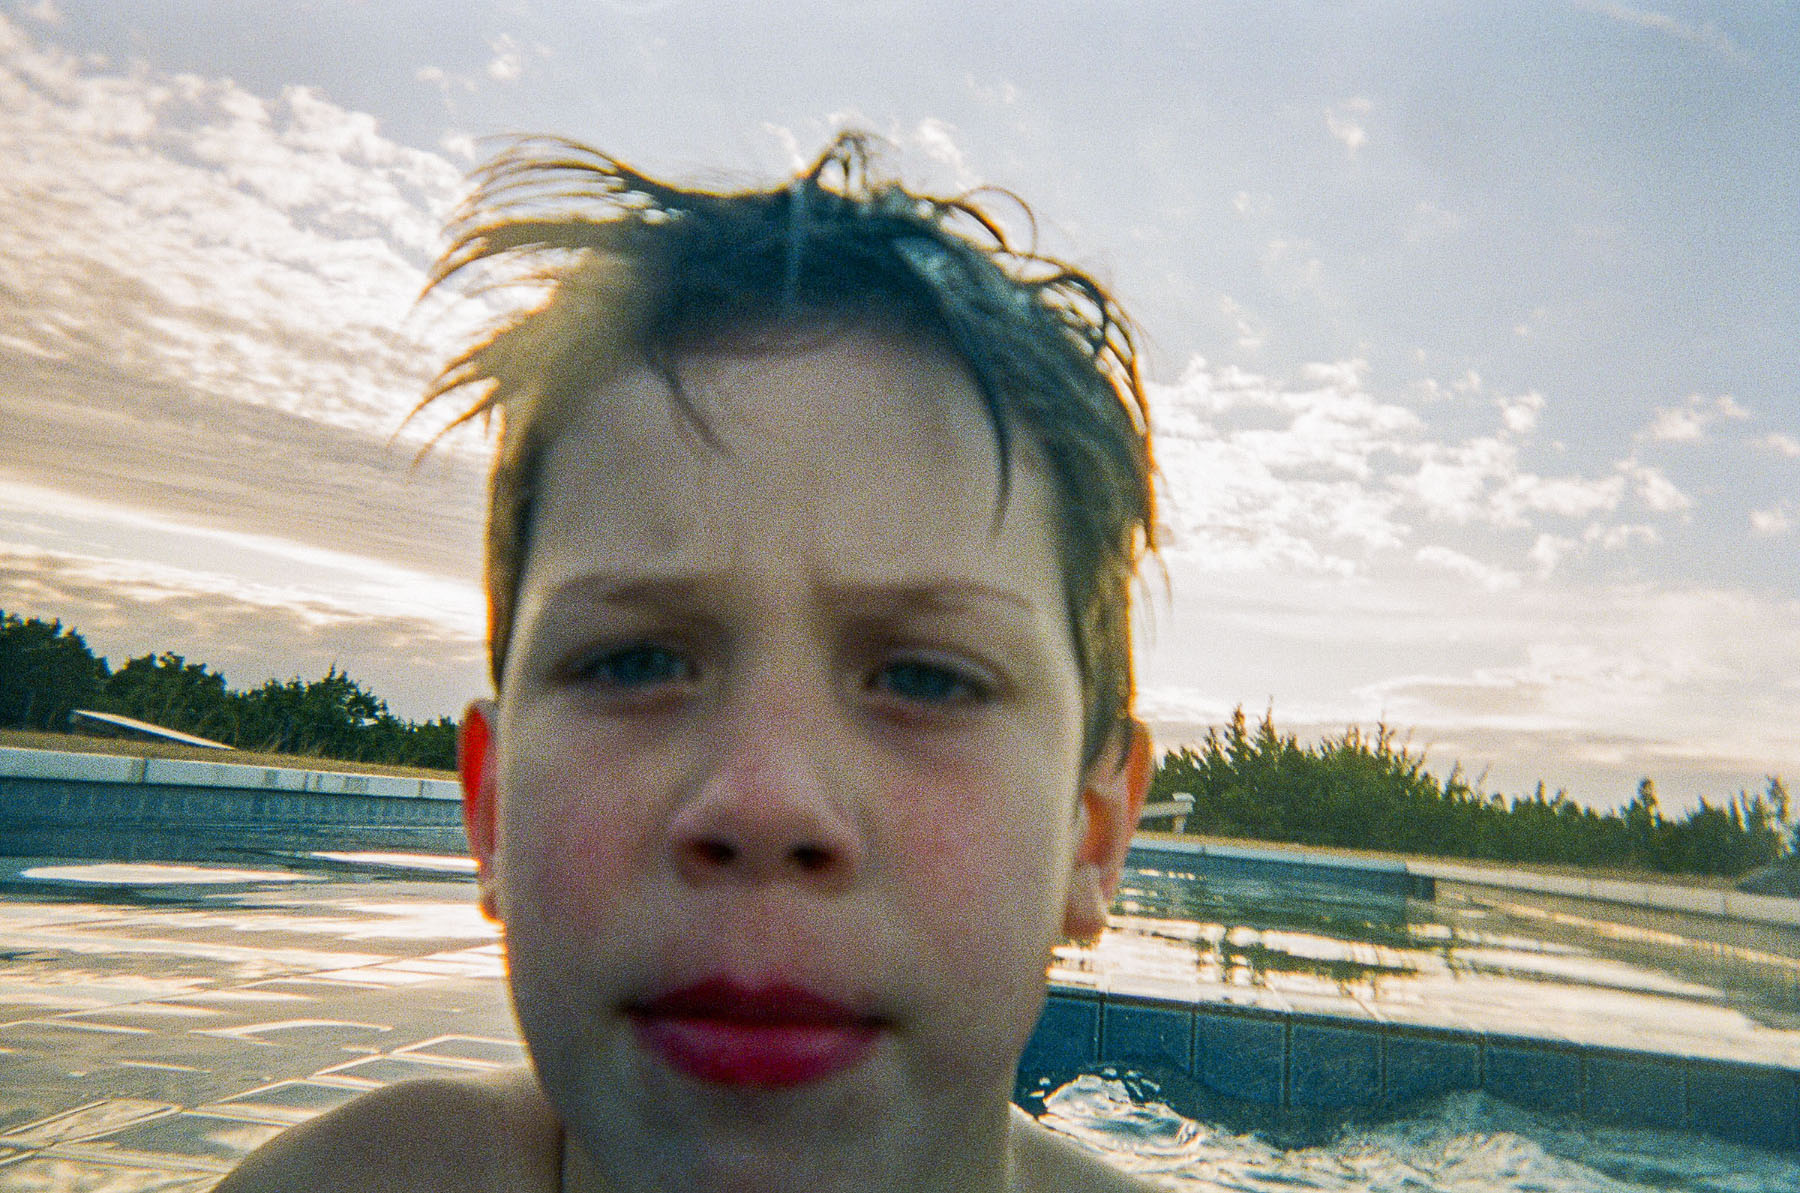 A selfie of a young man in a swimming pool